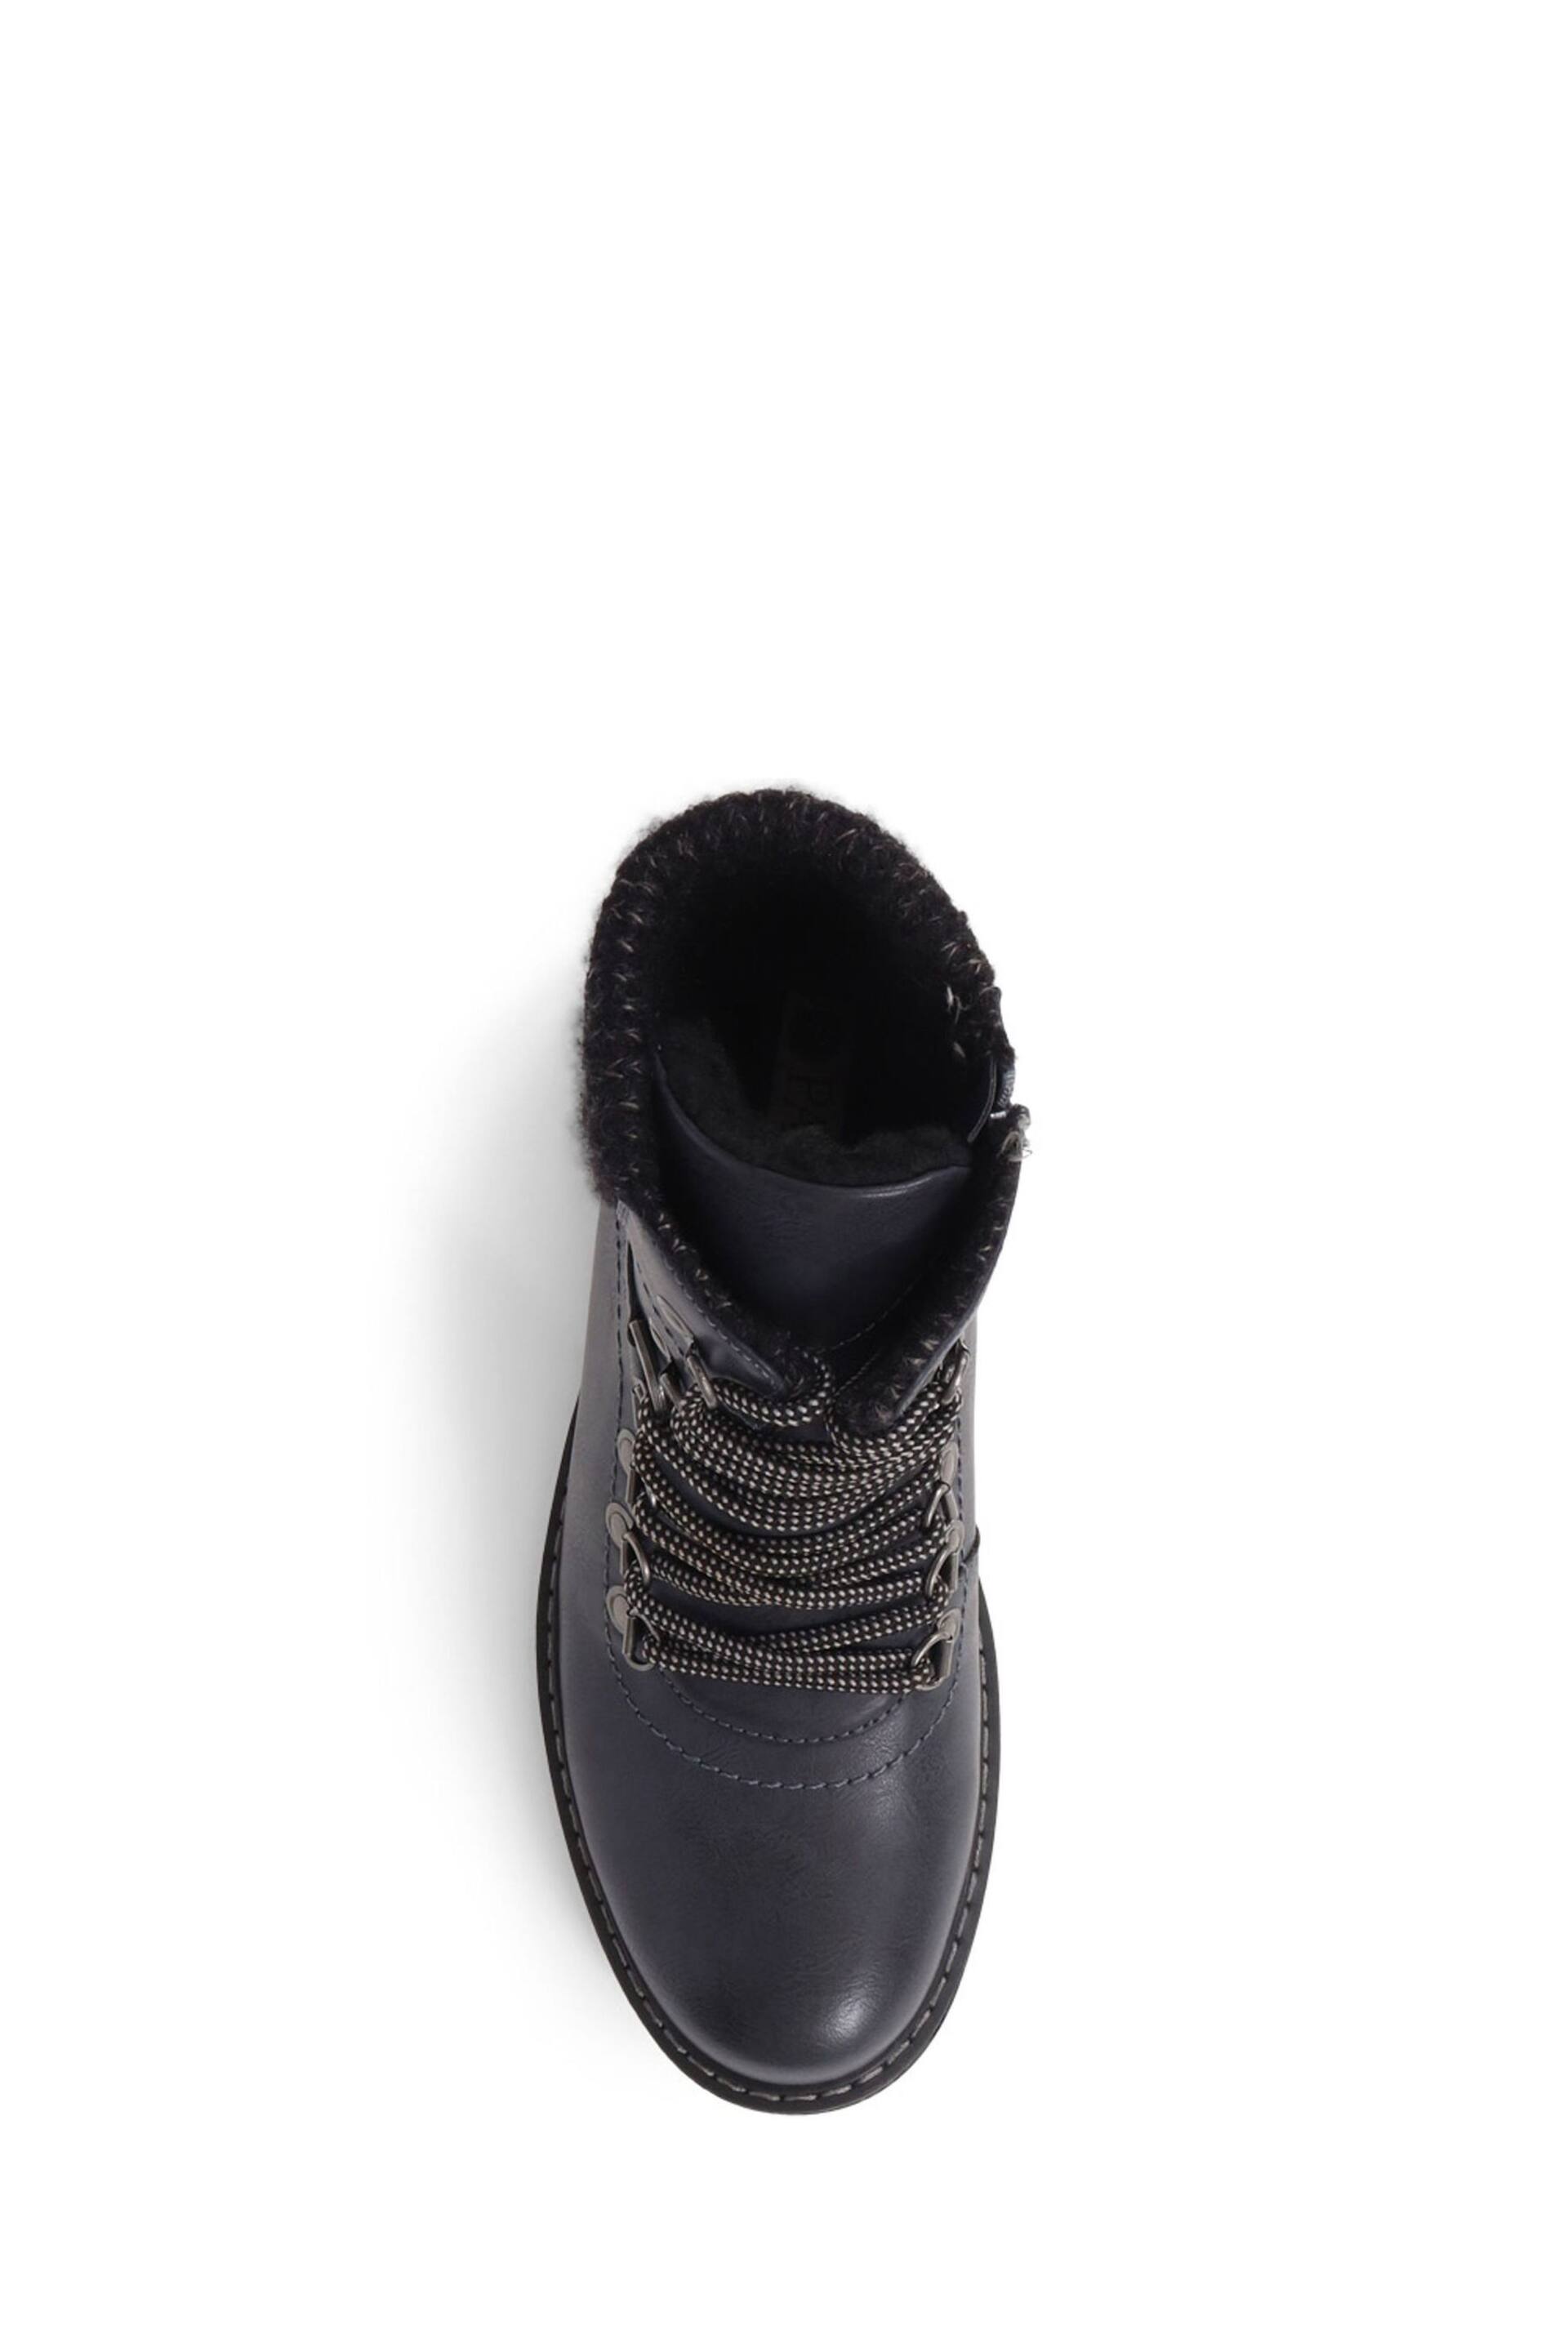 Pavers Lace Up Ankle Boots - Image 4 of 5